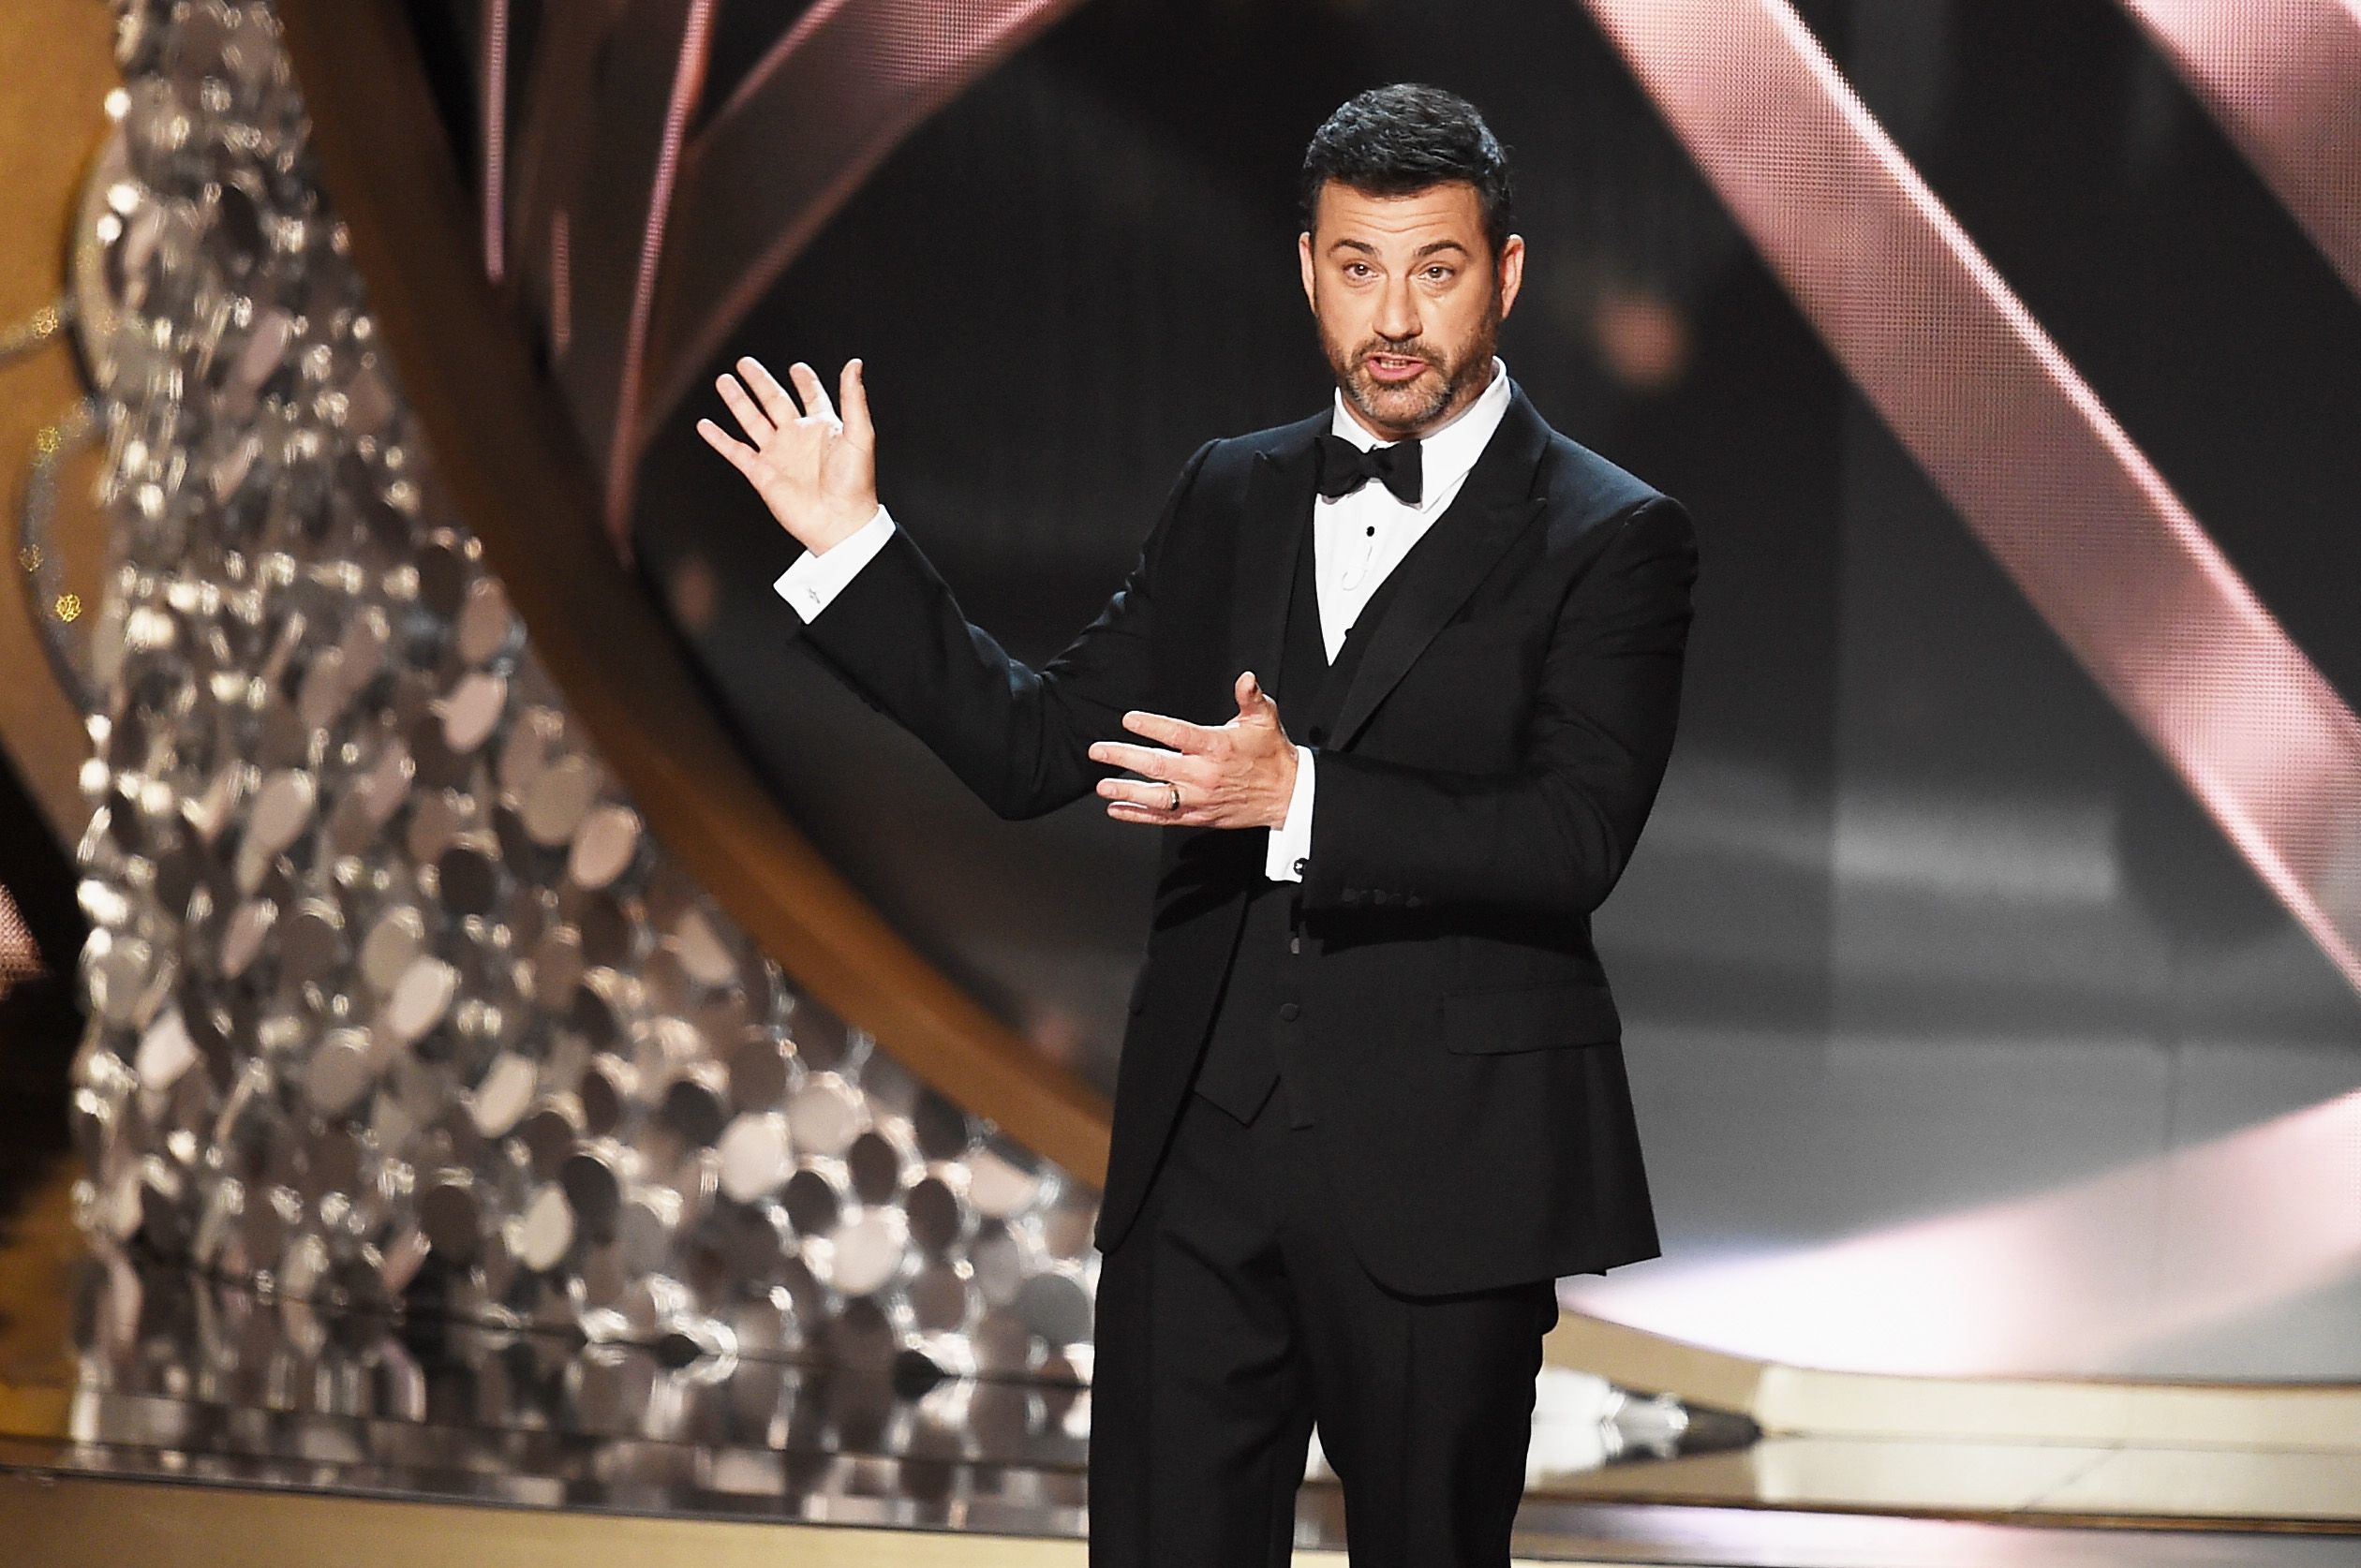 Jimmy Kimmel faces backlash for Bill Cosby joke at the Emmys